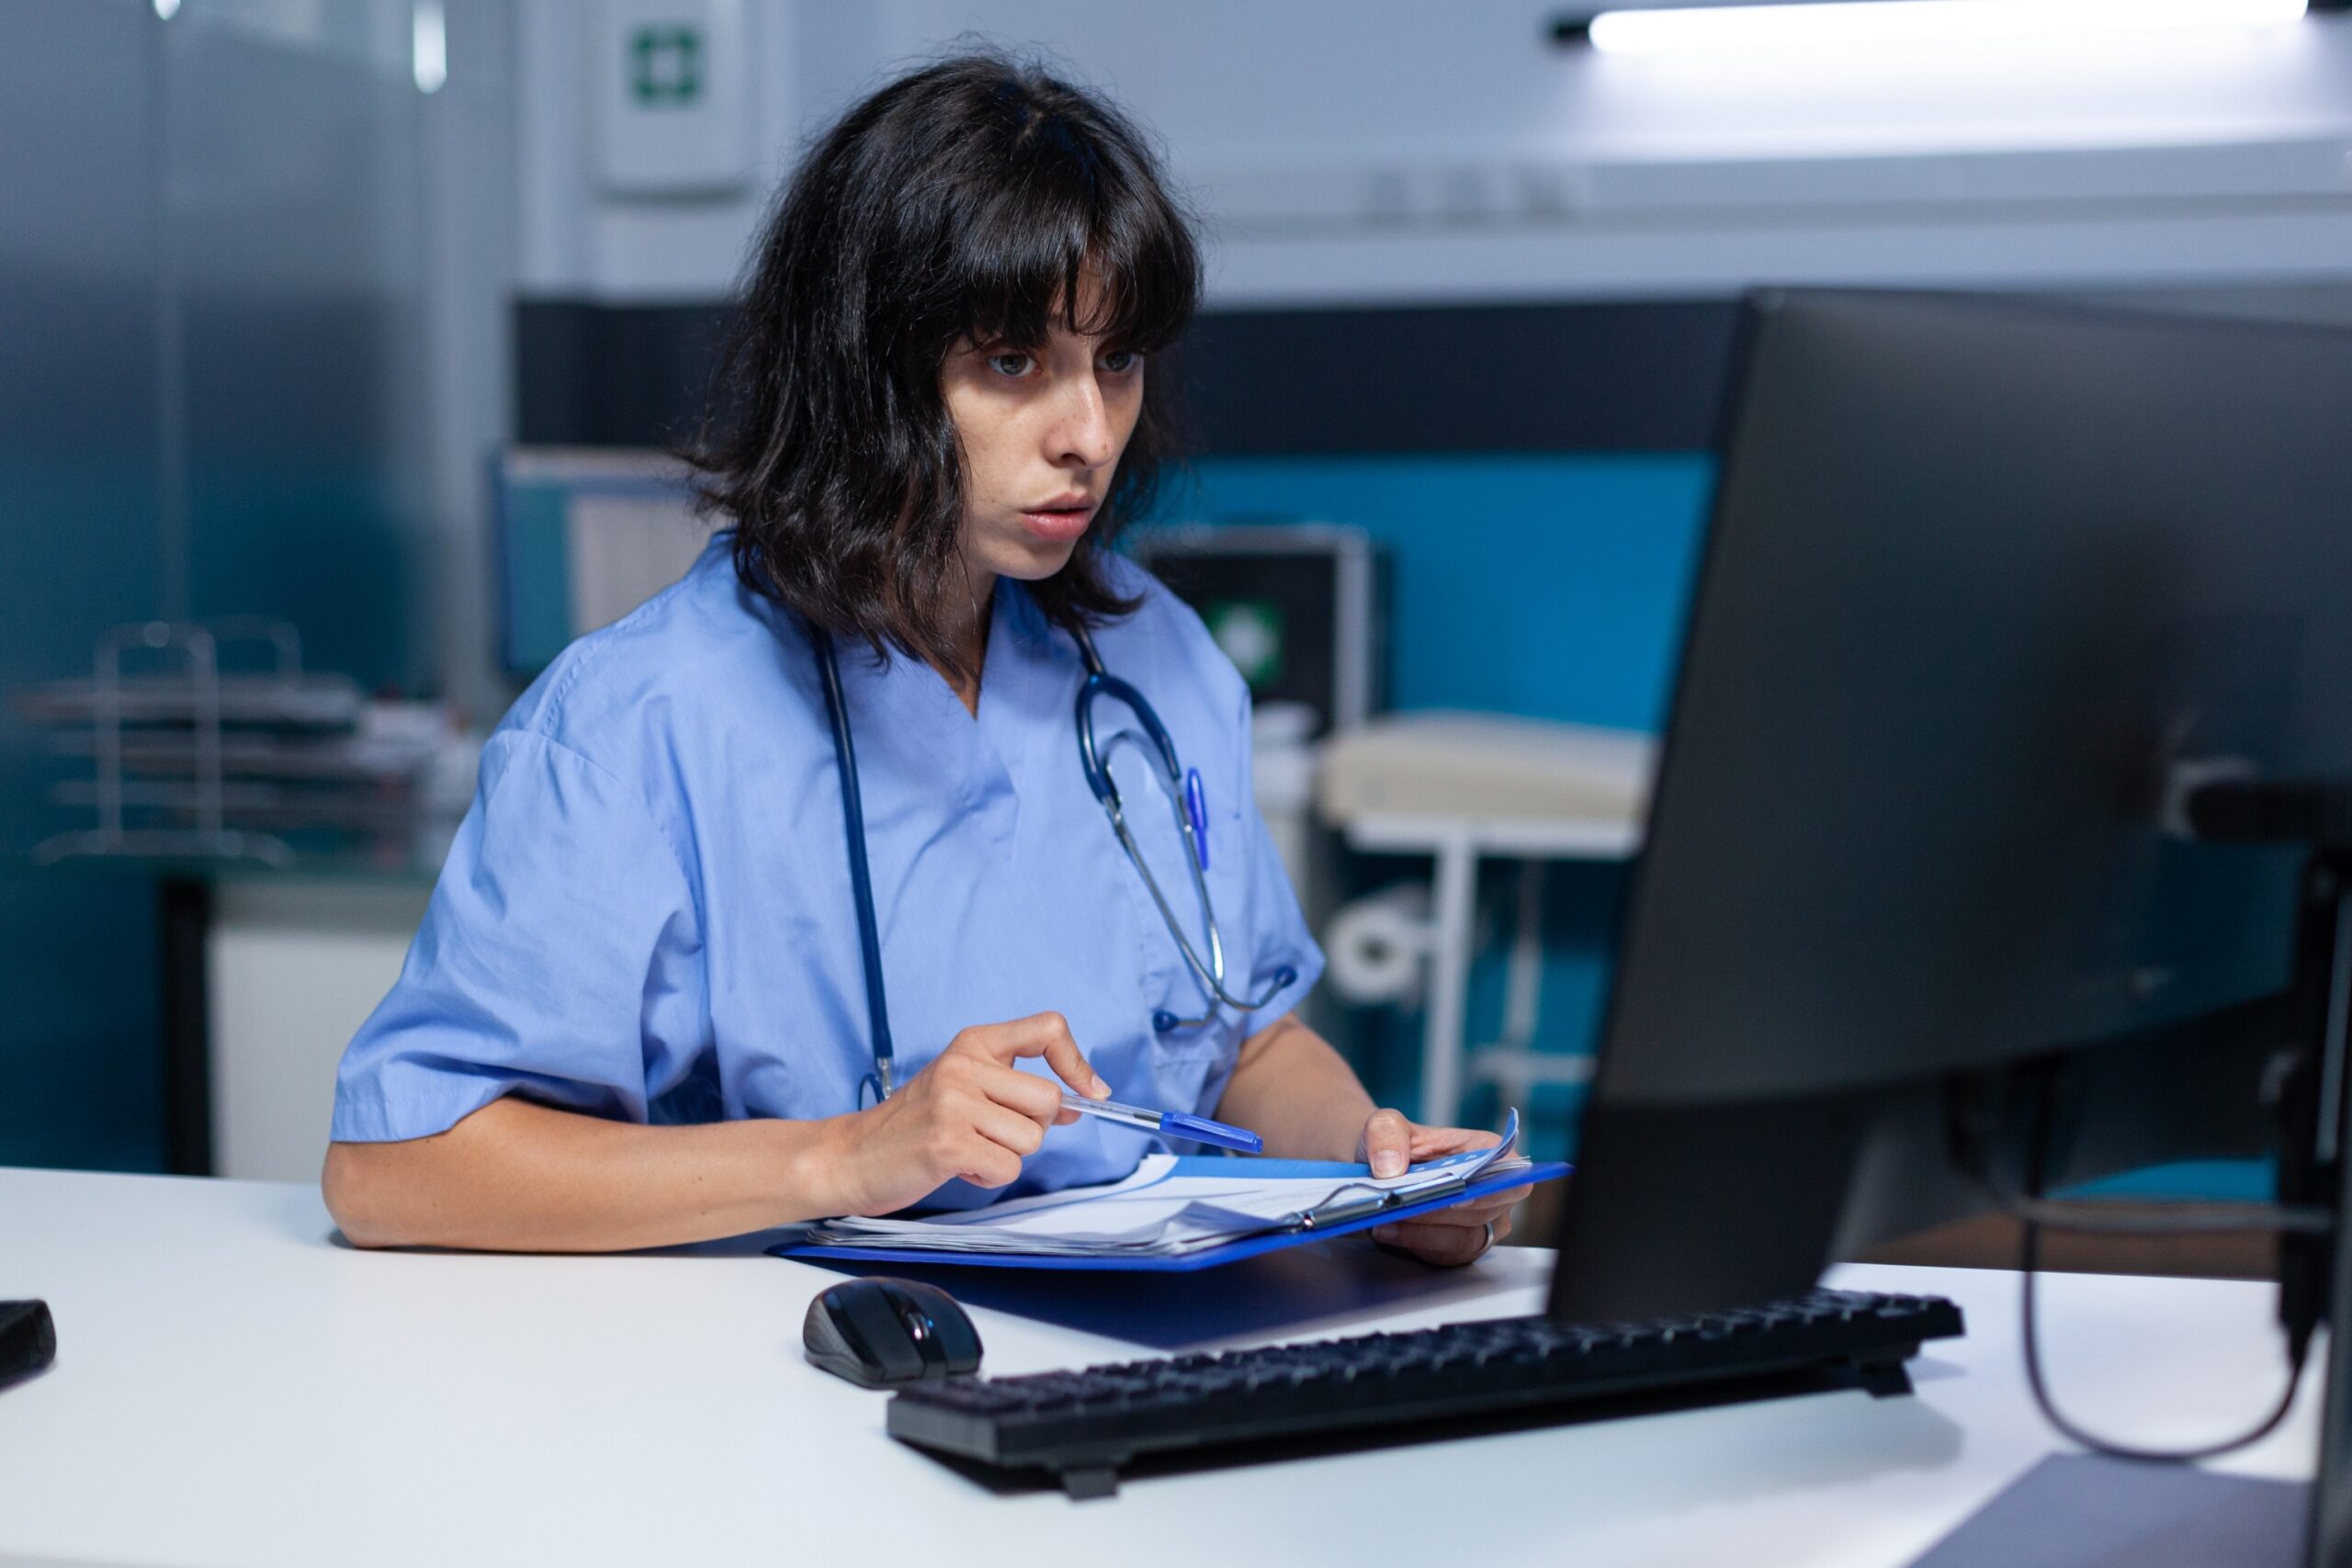 medical officer is computer working with checkup papers